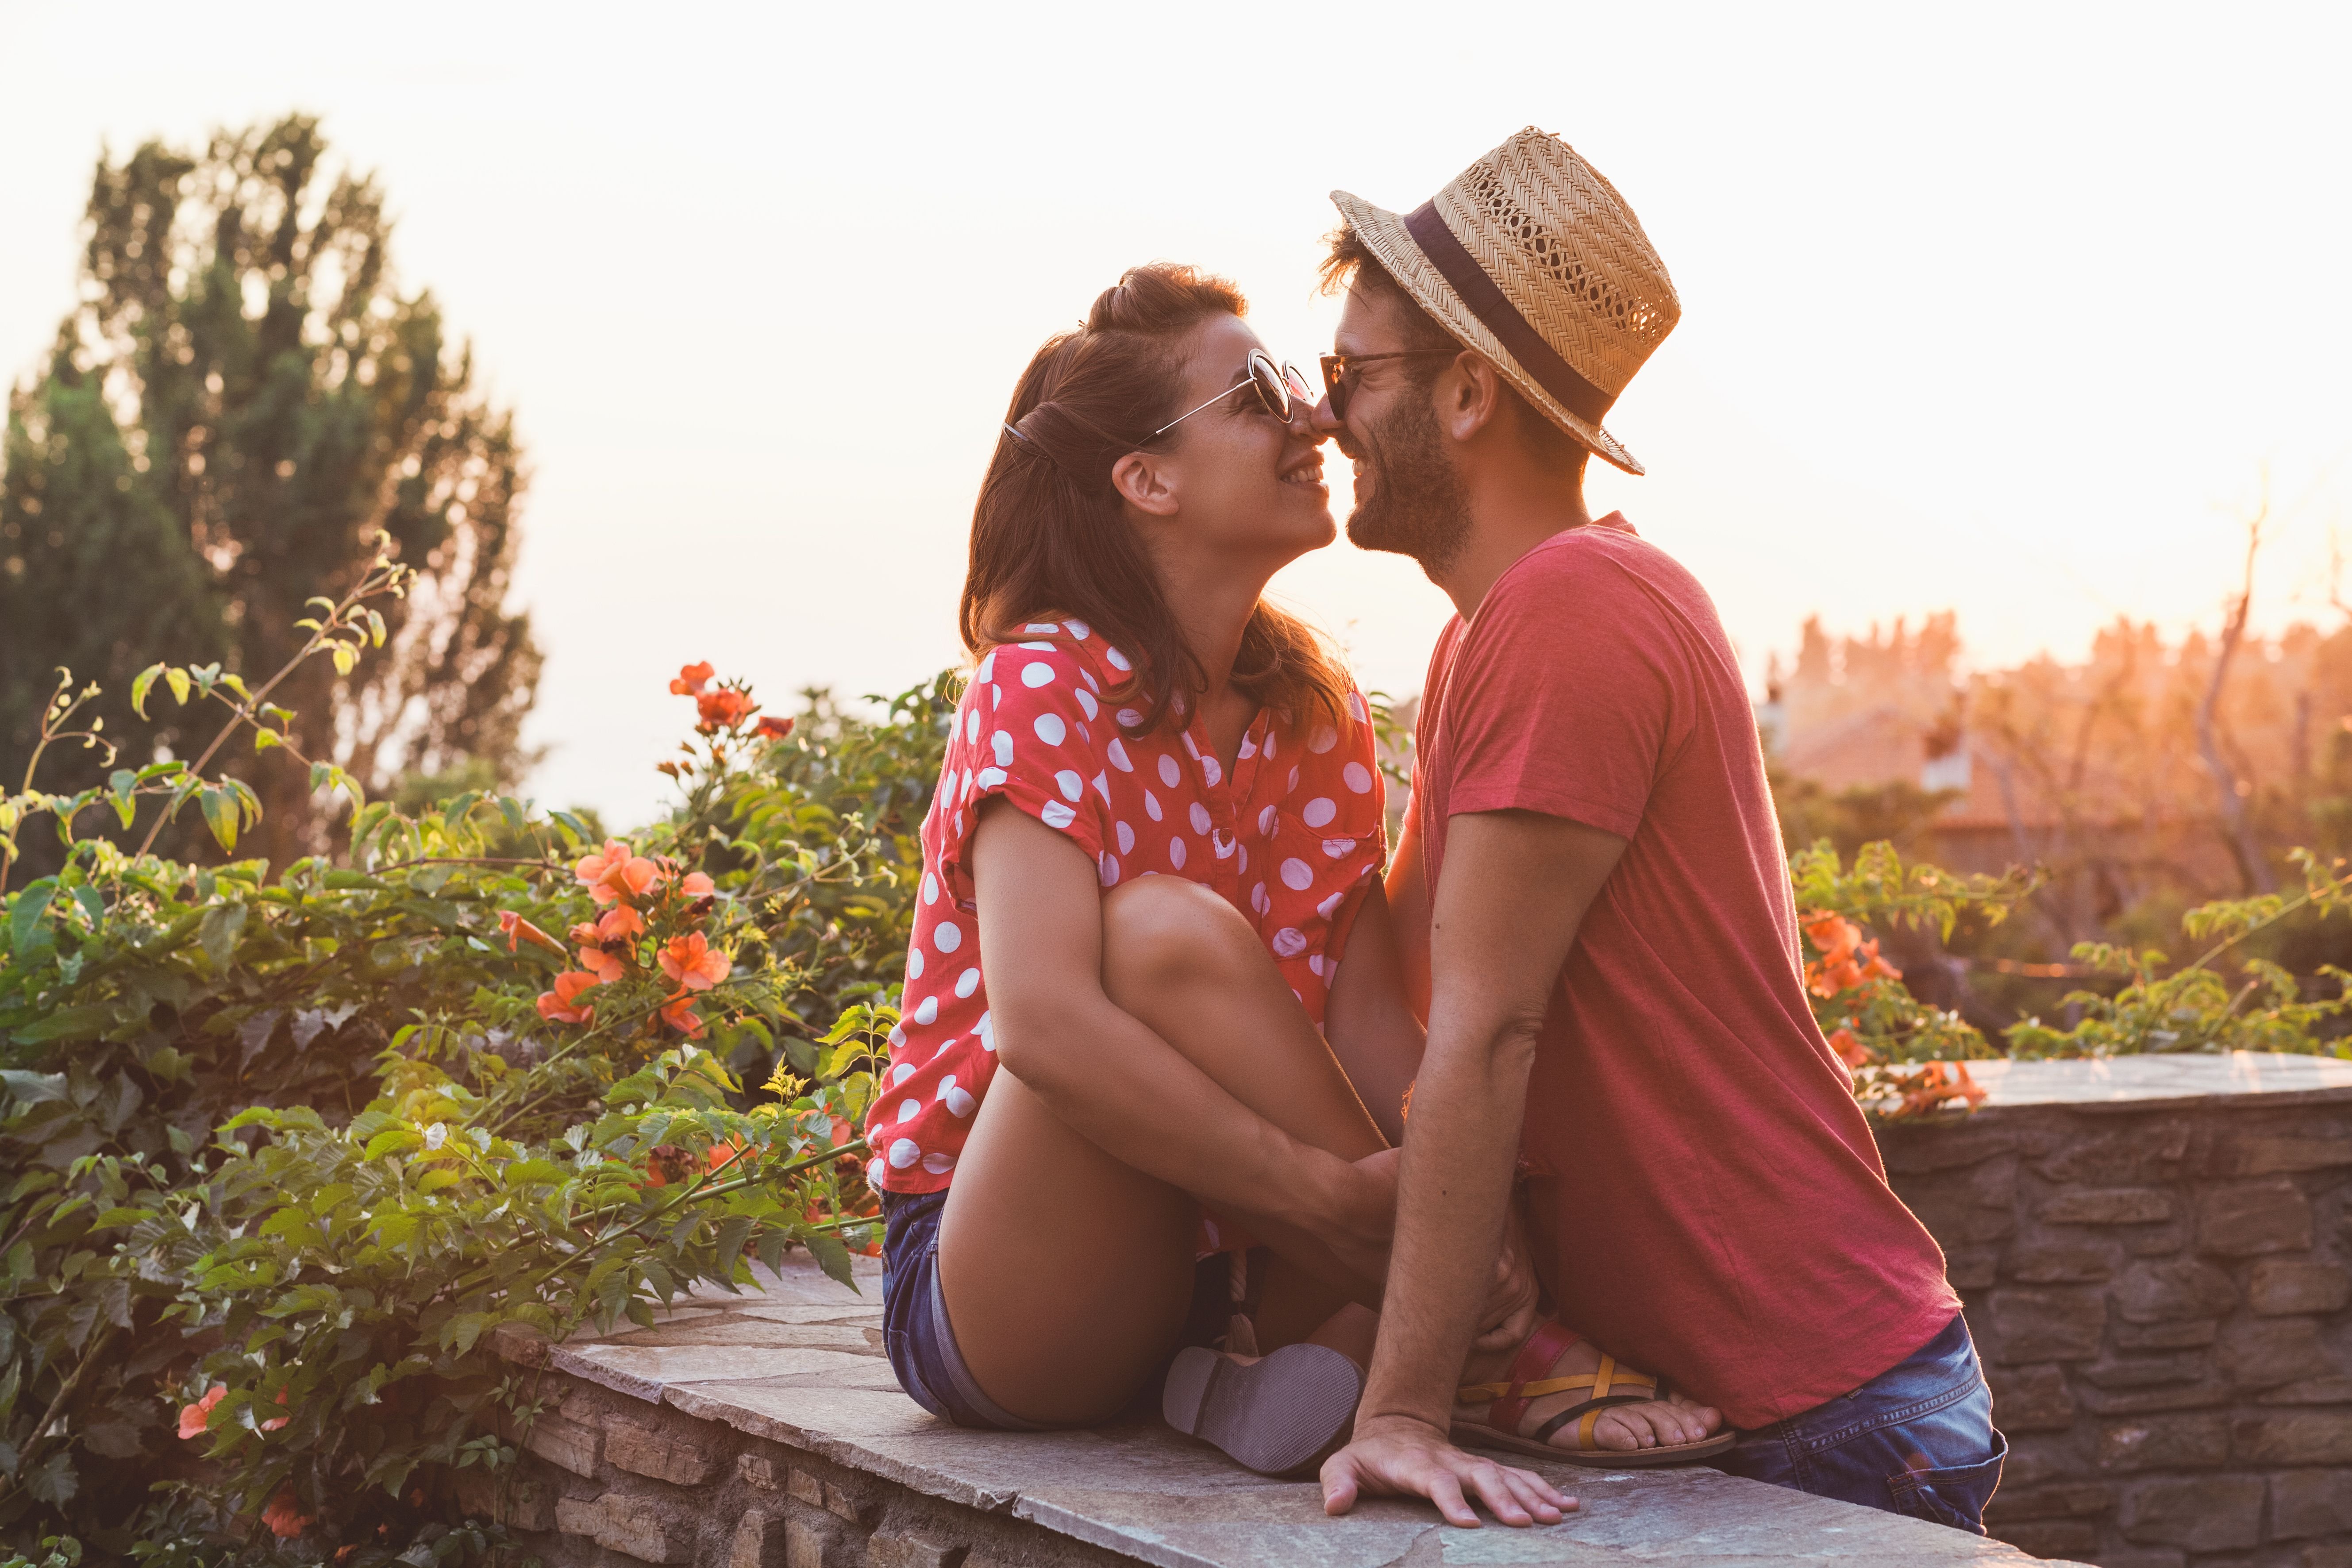 A couple look sweetly at each other during golden hour. | Source: Shutterstock